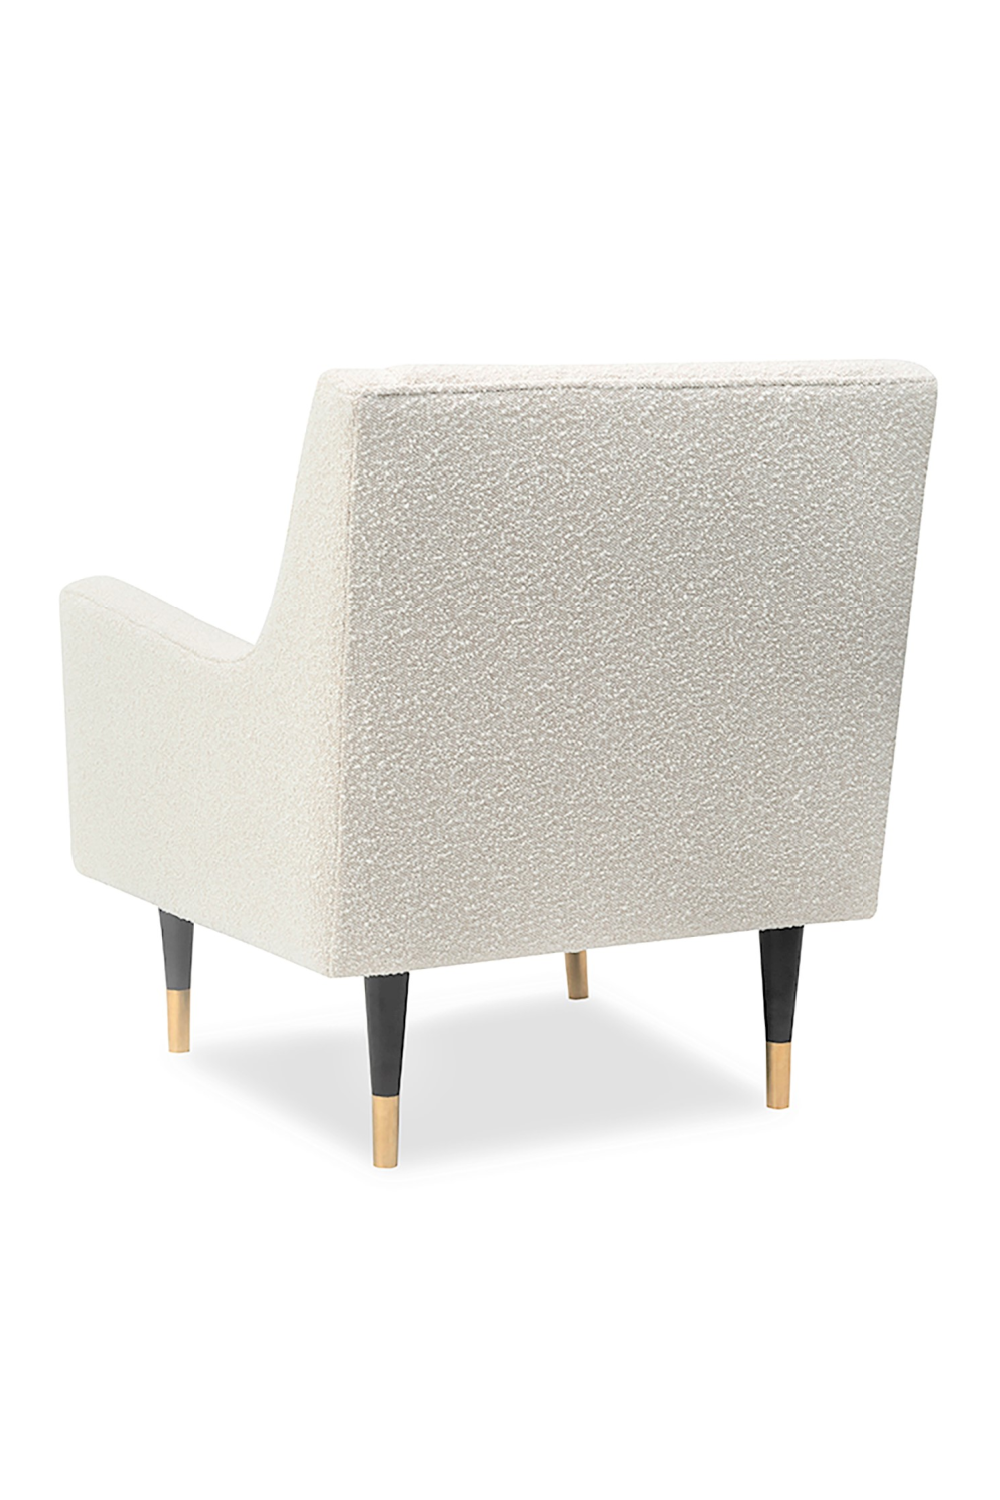 Upholstered Modern Lounge Chair | Liang & Eimil Conte | OROA.com